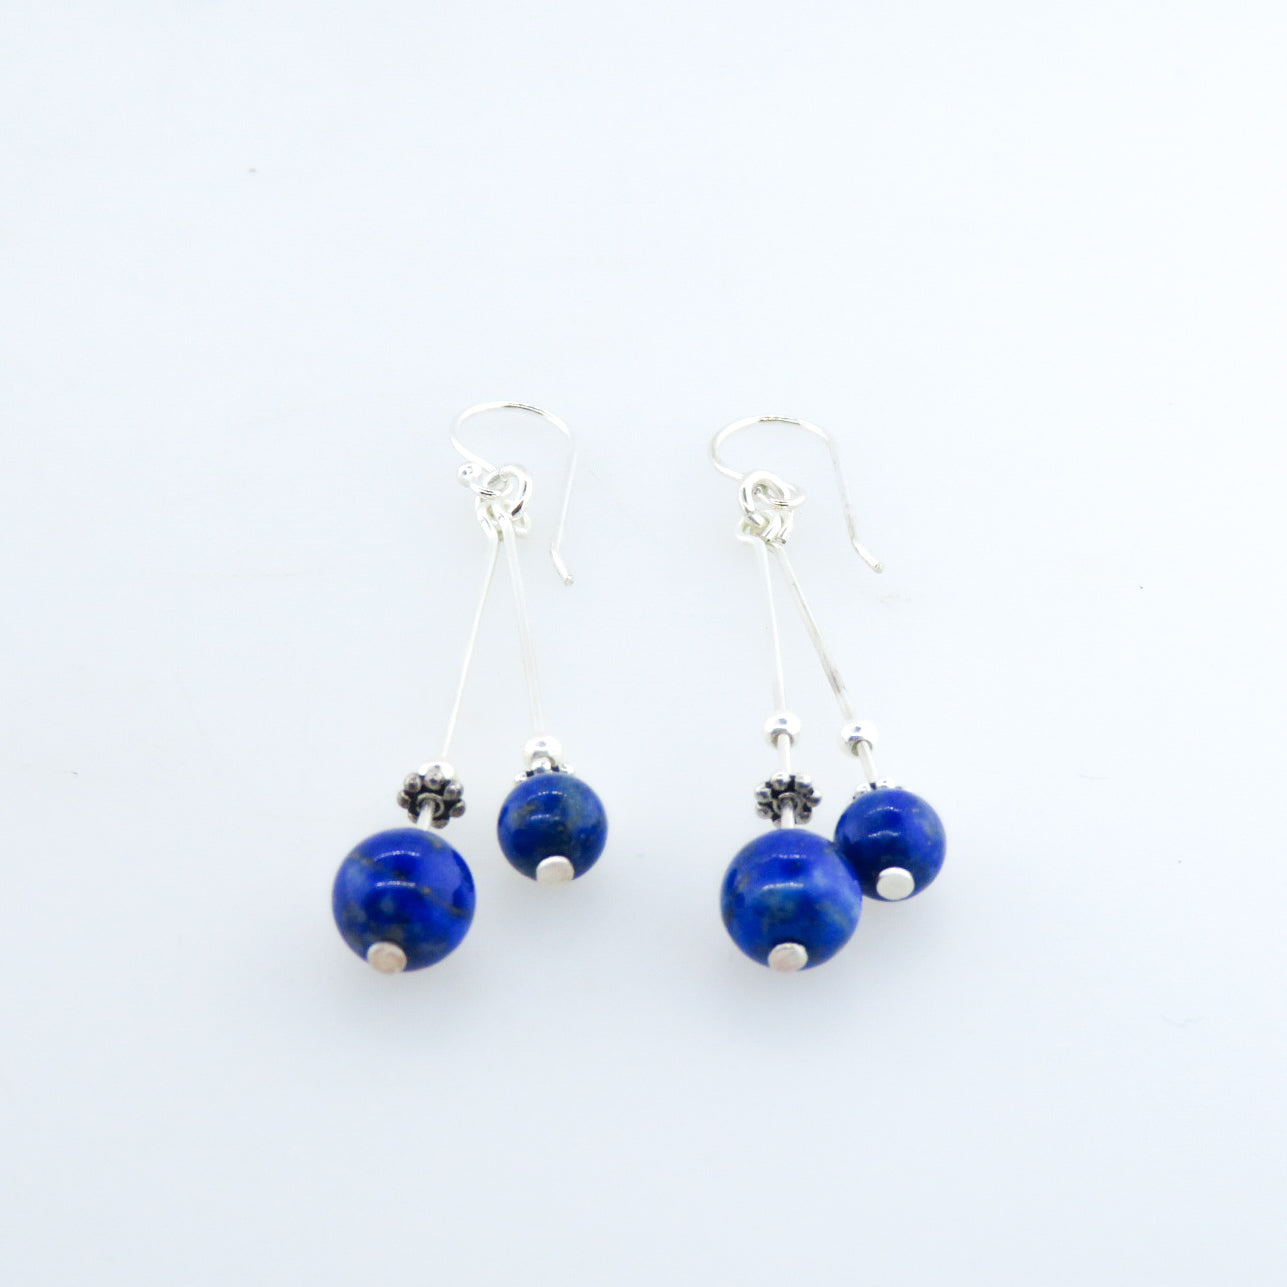 Lapis Lazuli Earrings with Sterling Silver